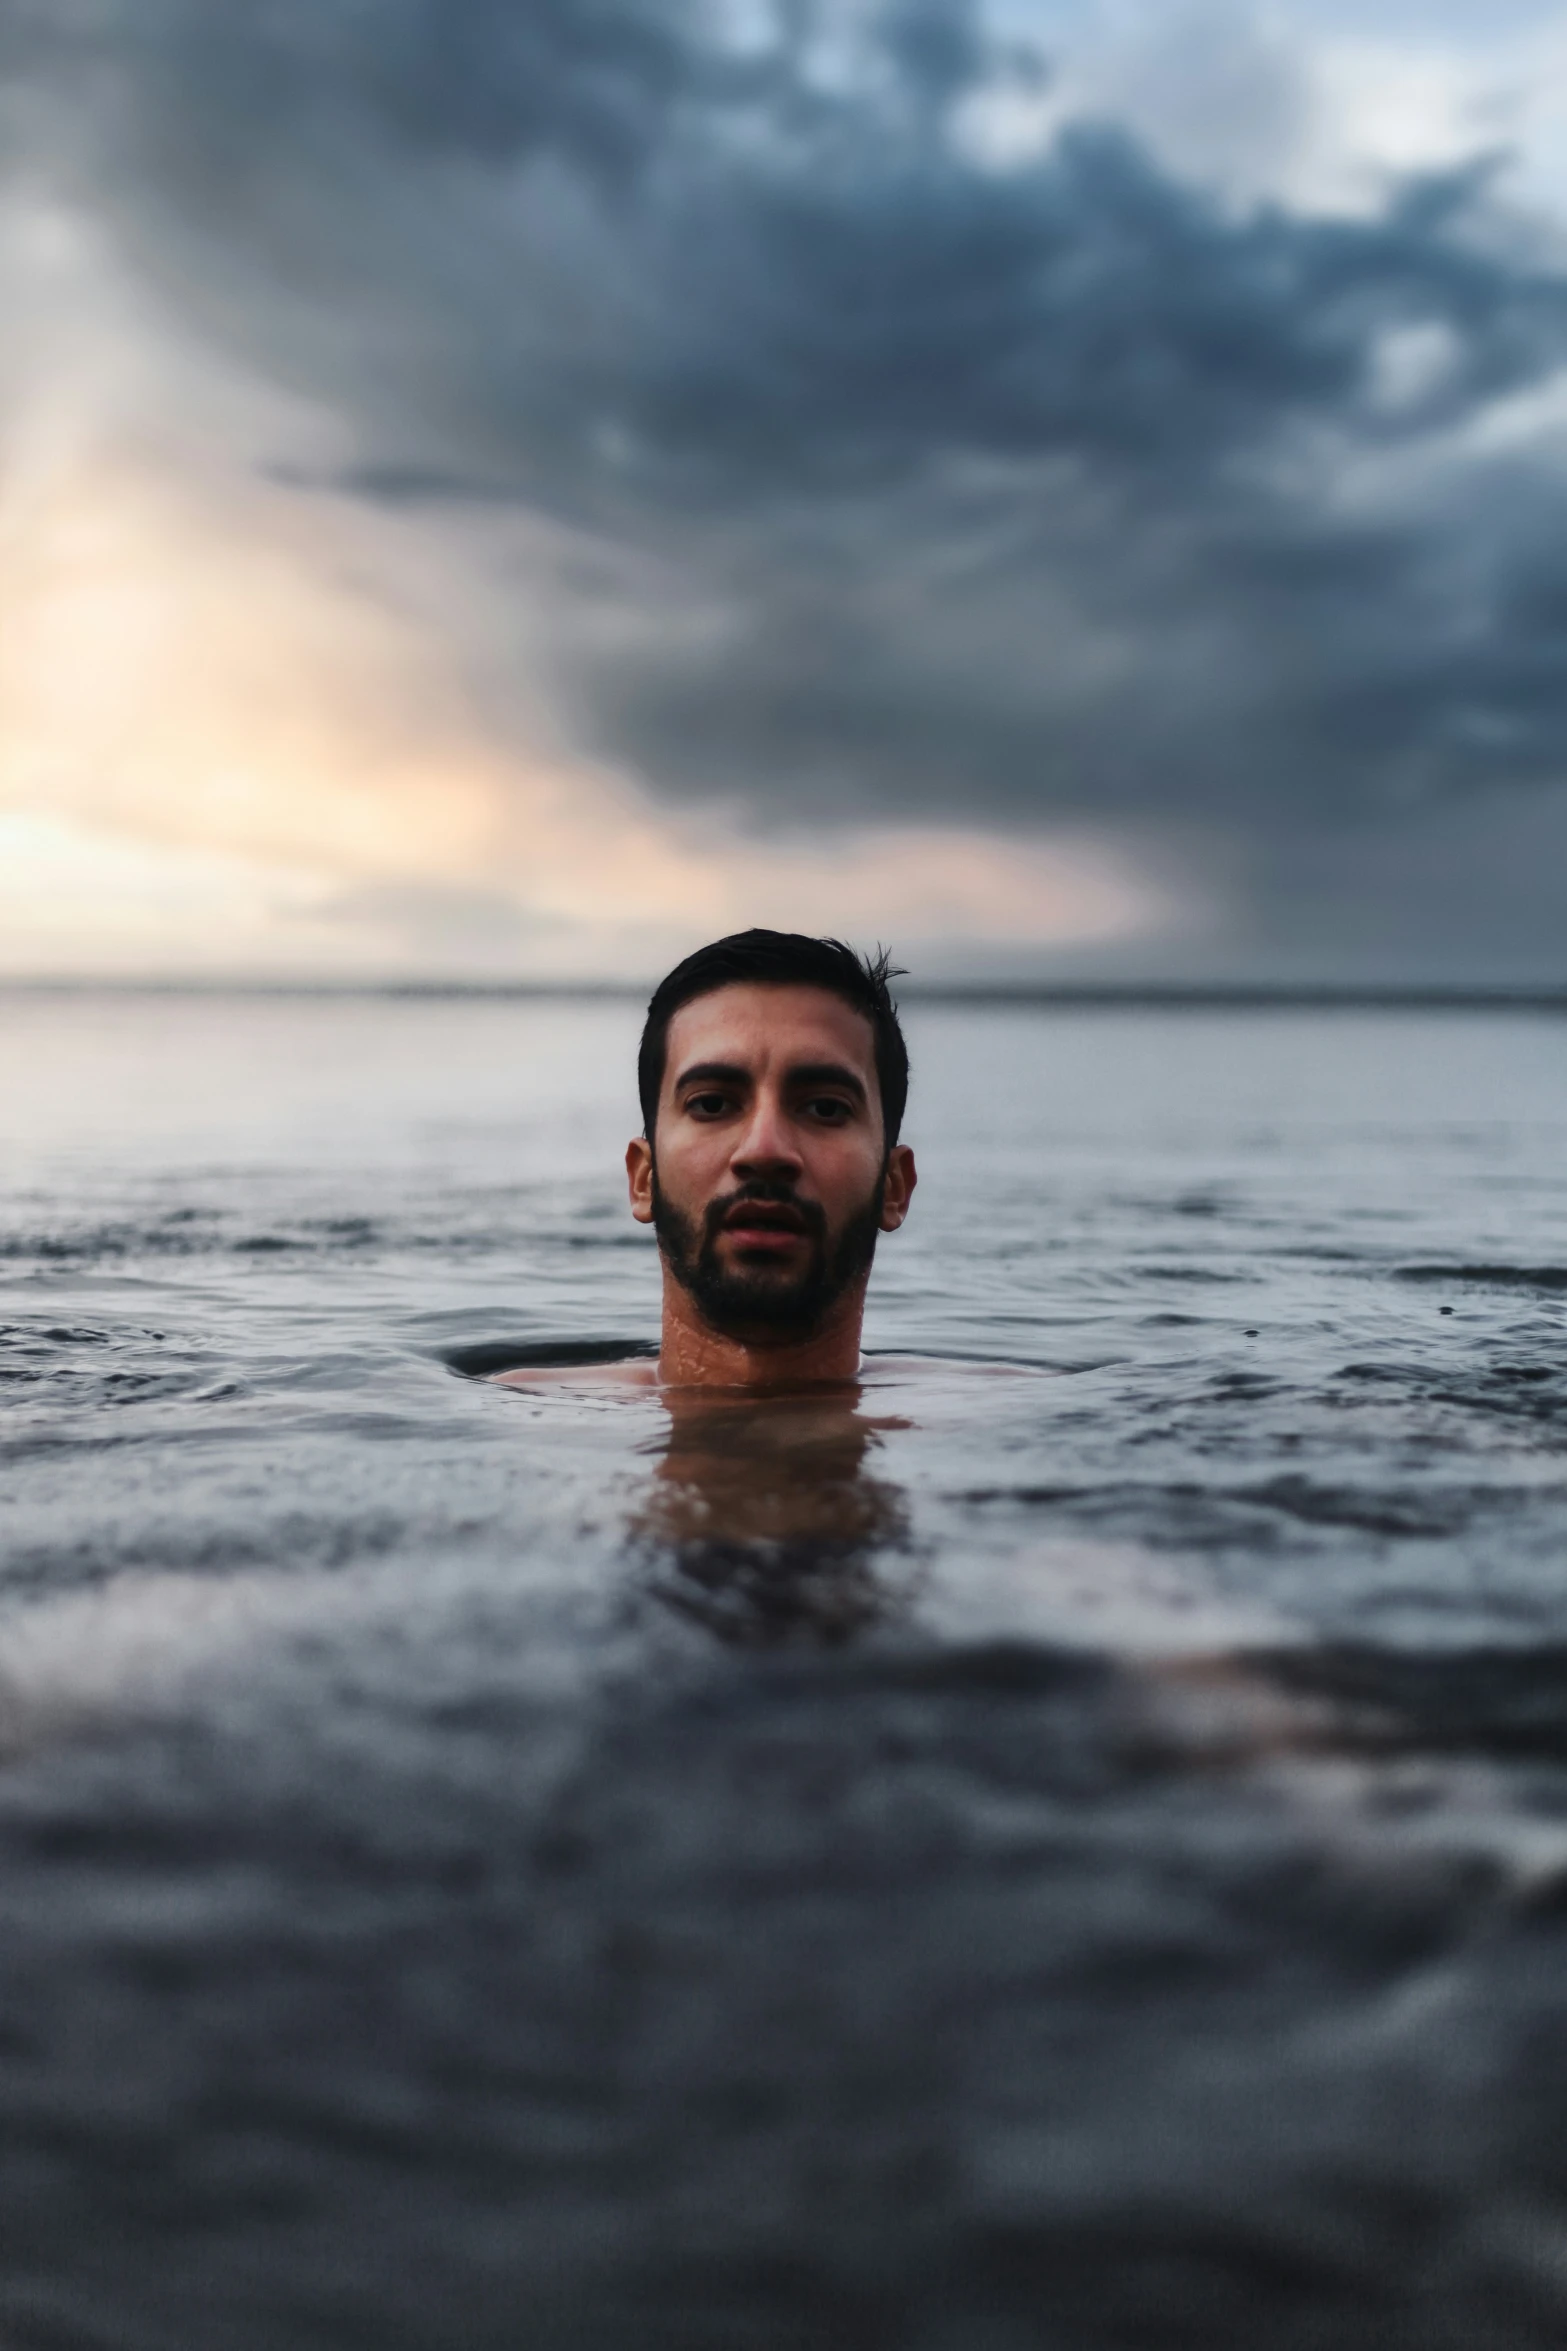 man with beard in middle of body in water